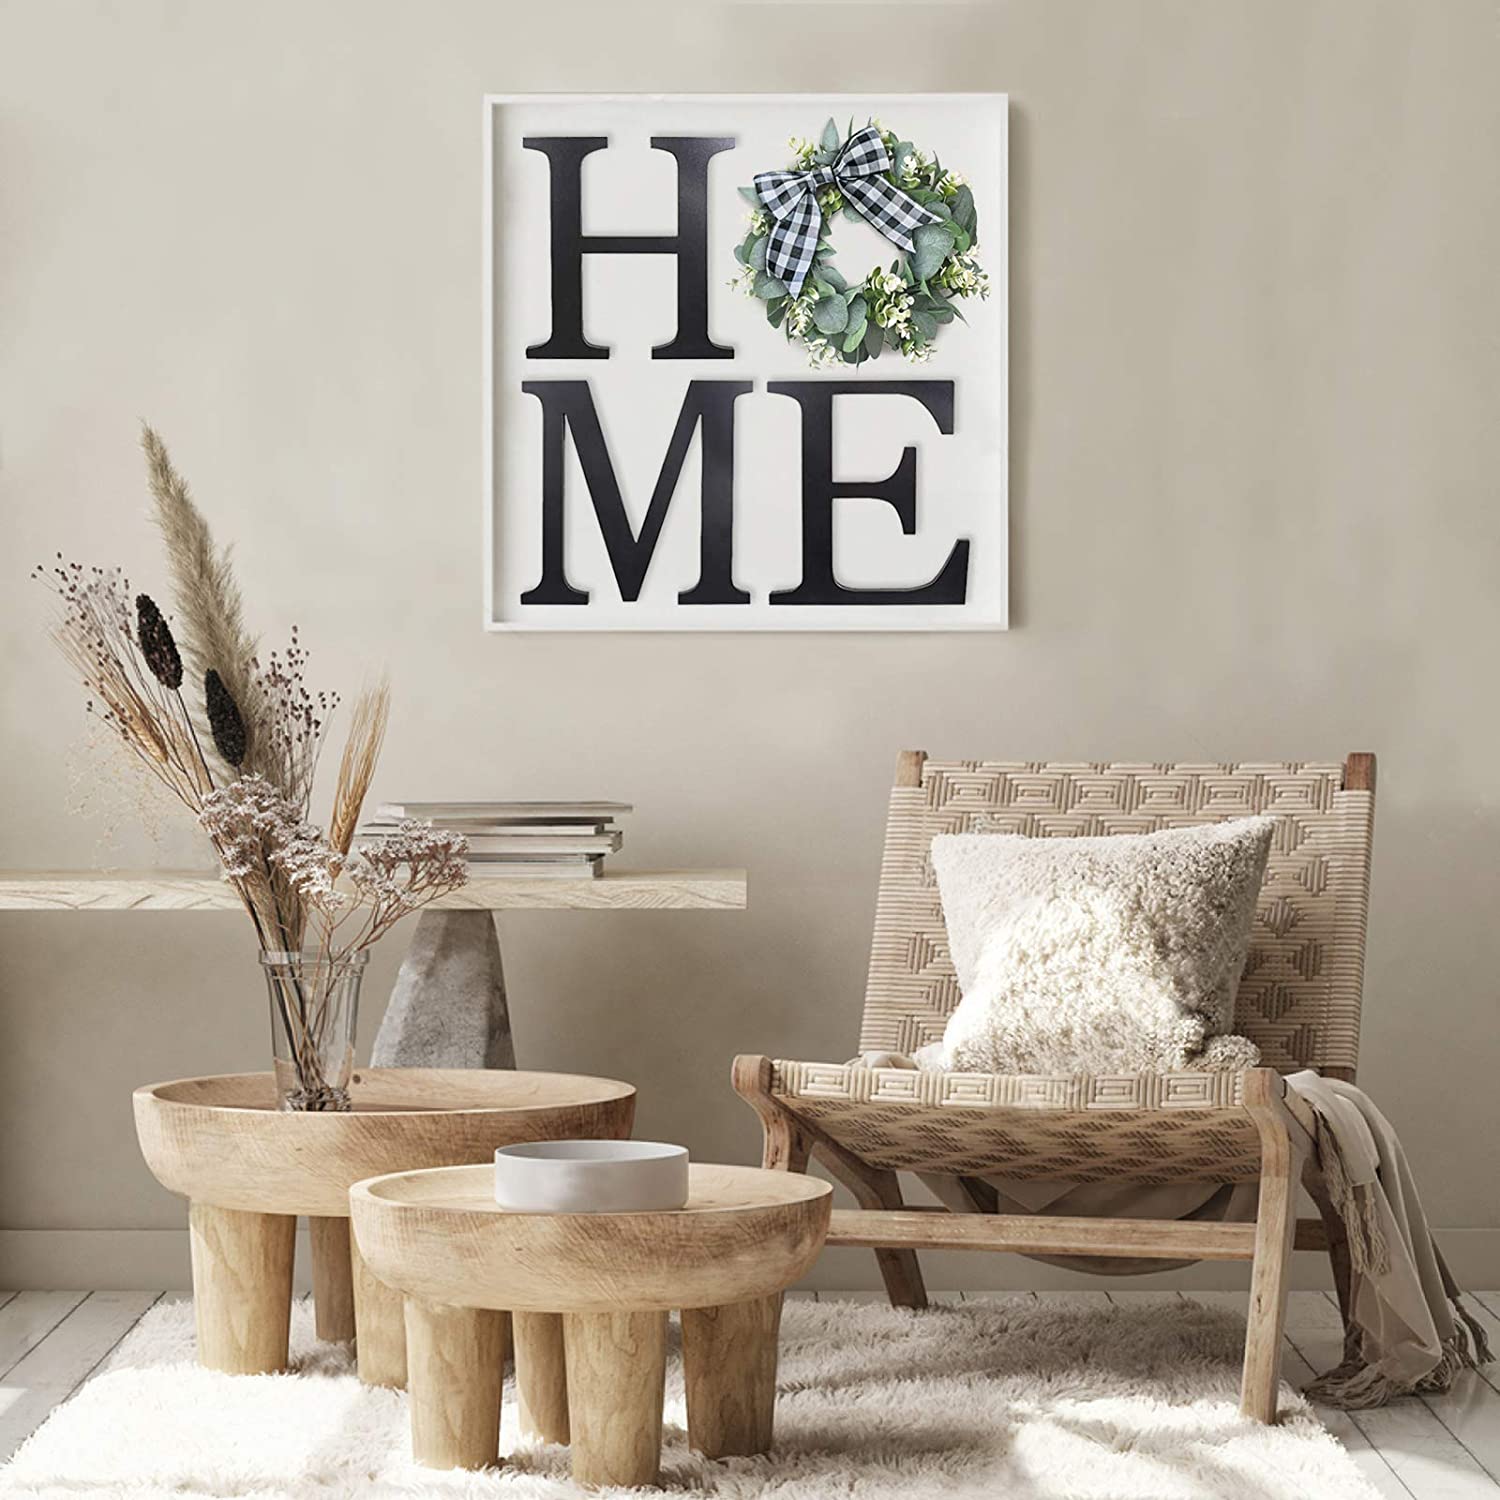 Home Sign Wall Hanging Decor, Farmhouse Wood Letters with Artificial Eucalyptus Wreath